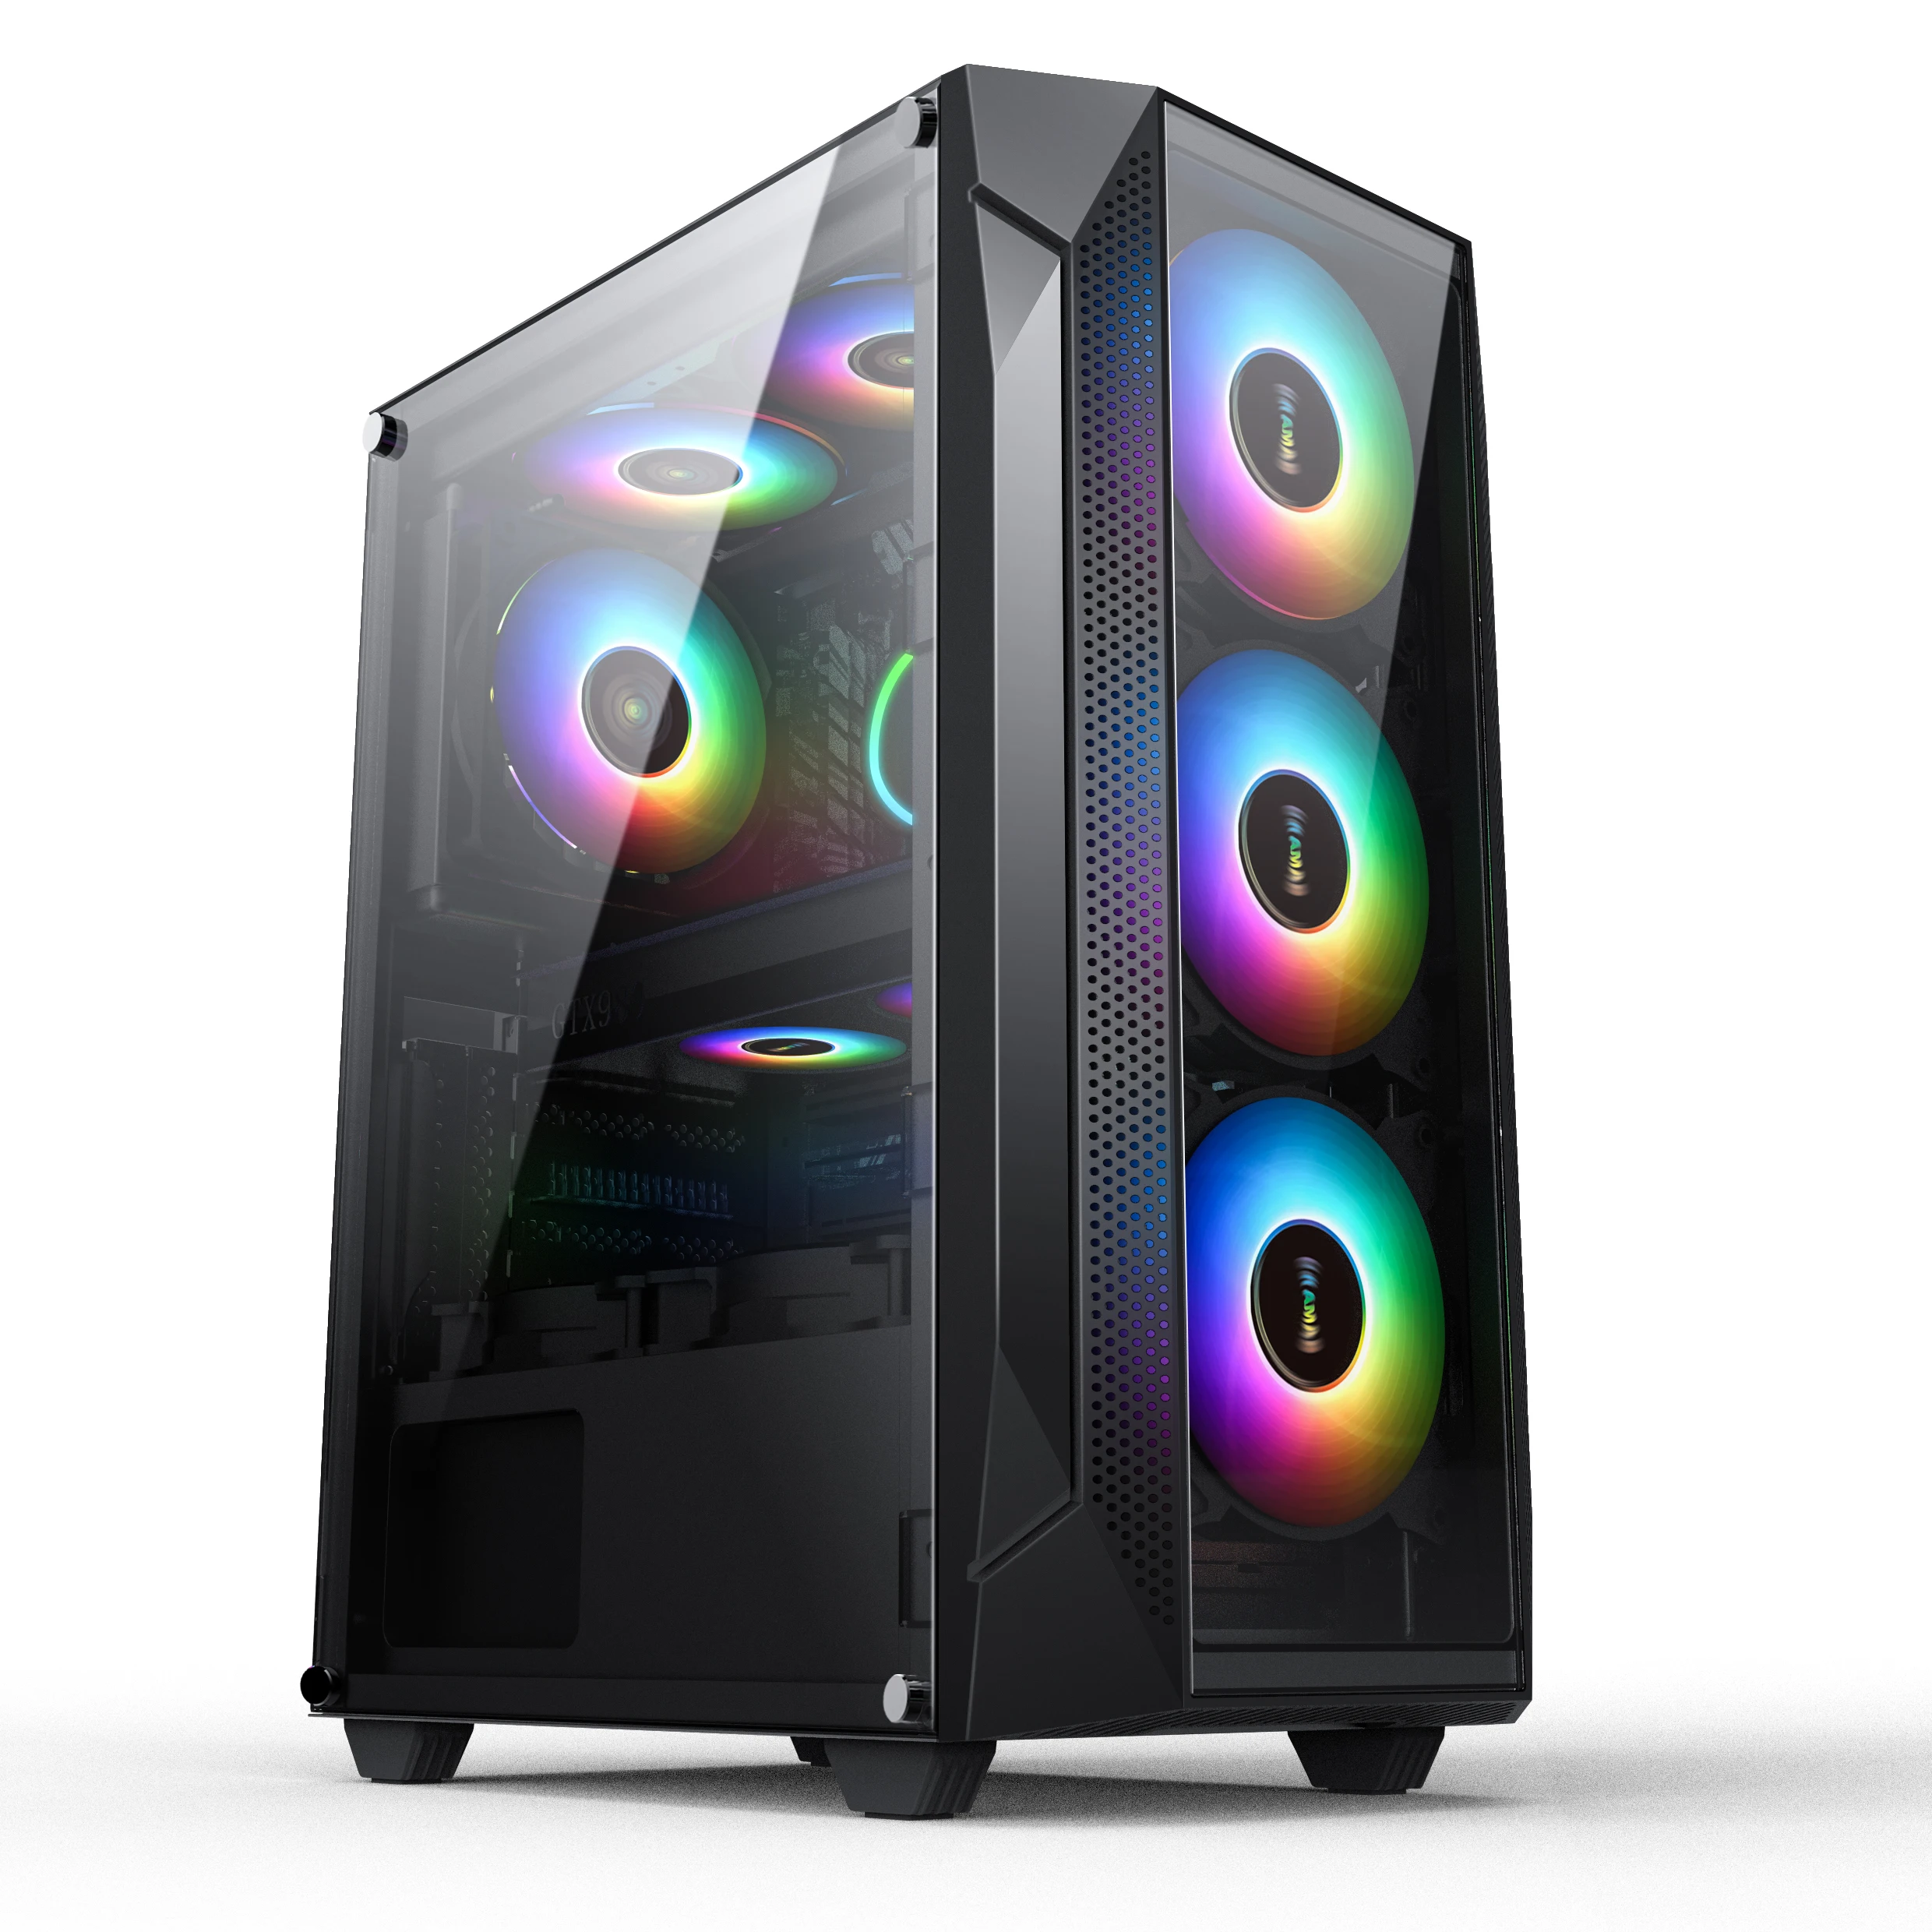 

BEST OFFER FOR BRAND NEW Gaming PC Core i9 9900k RTX 2080 Ti 16GB DDR4 Water Cooling Gaming Desktop, Black